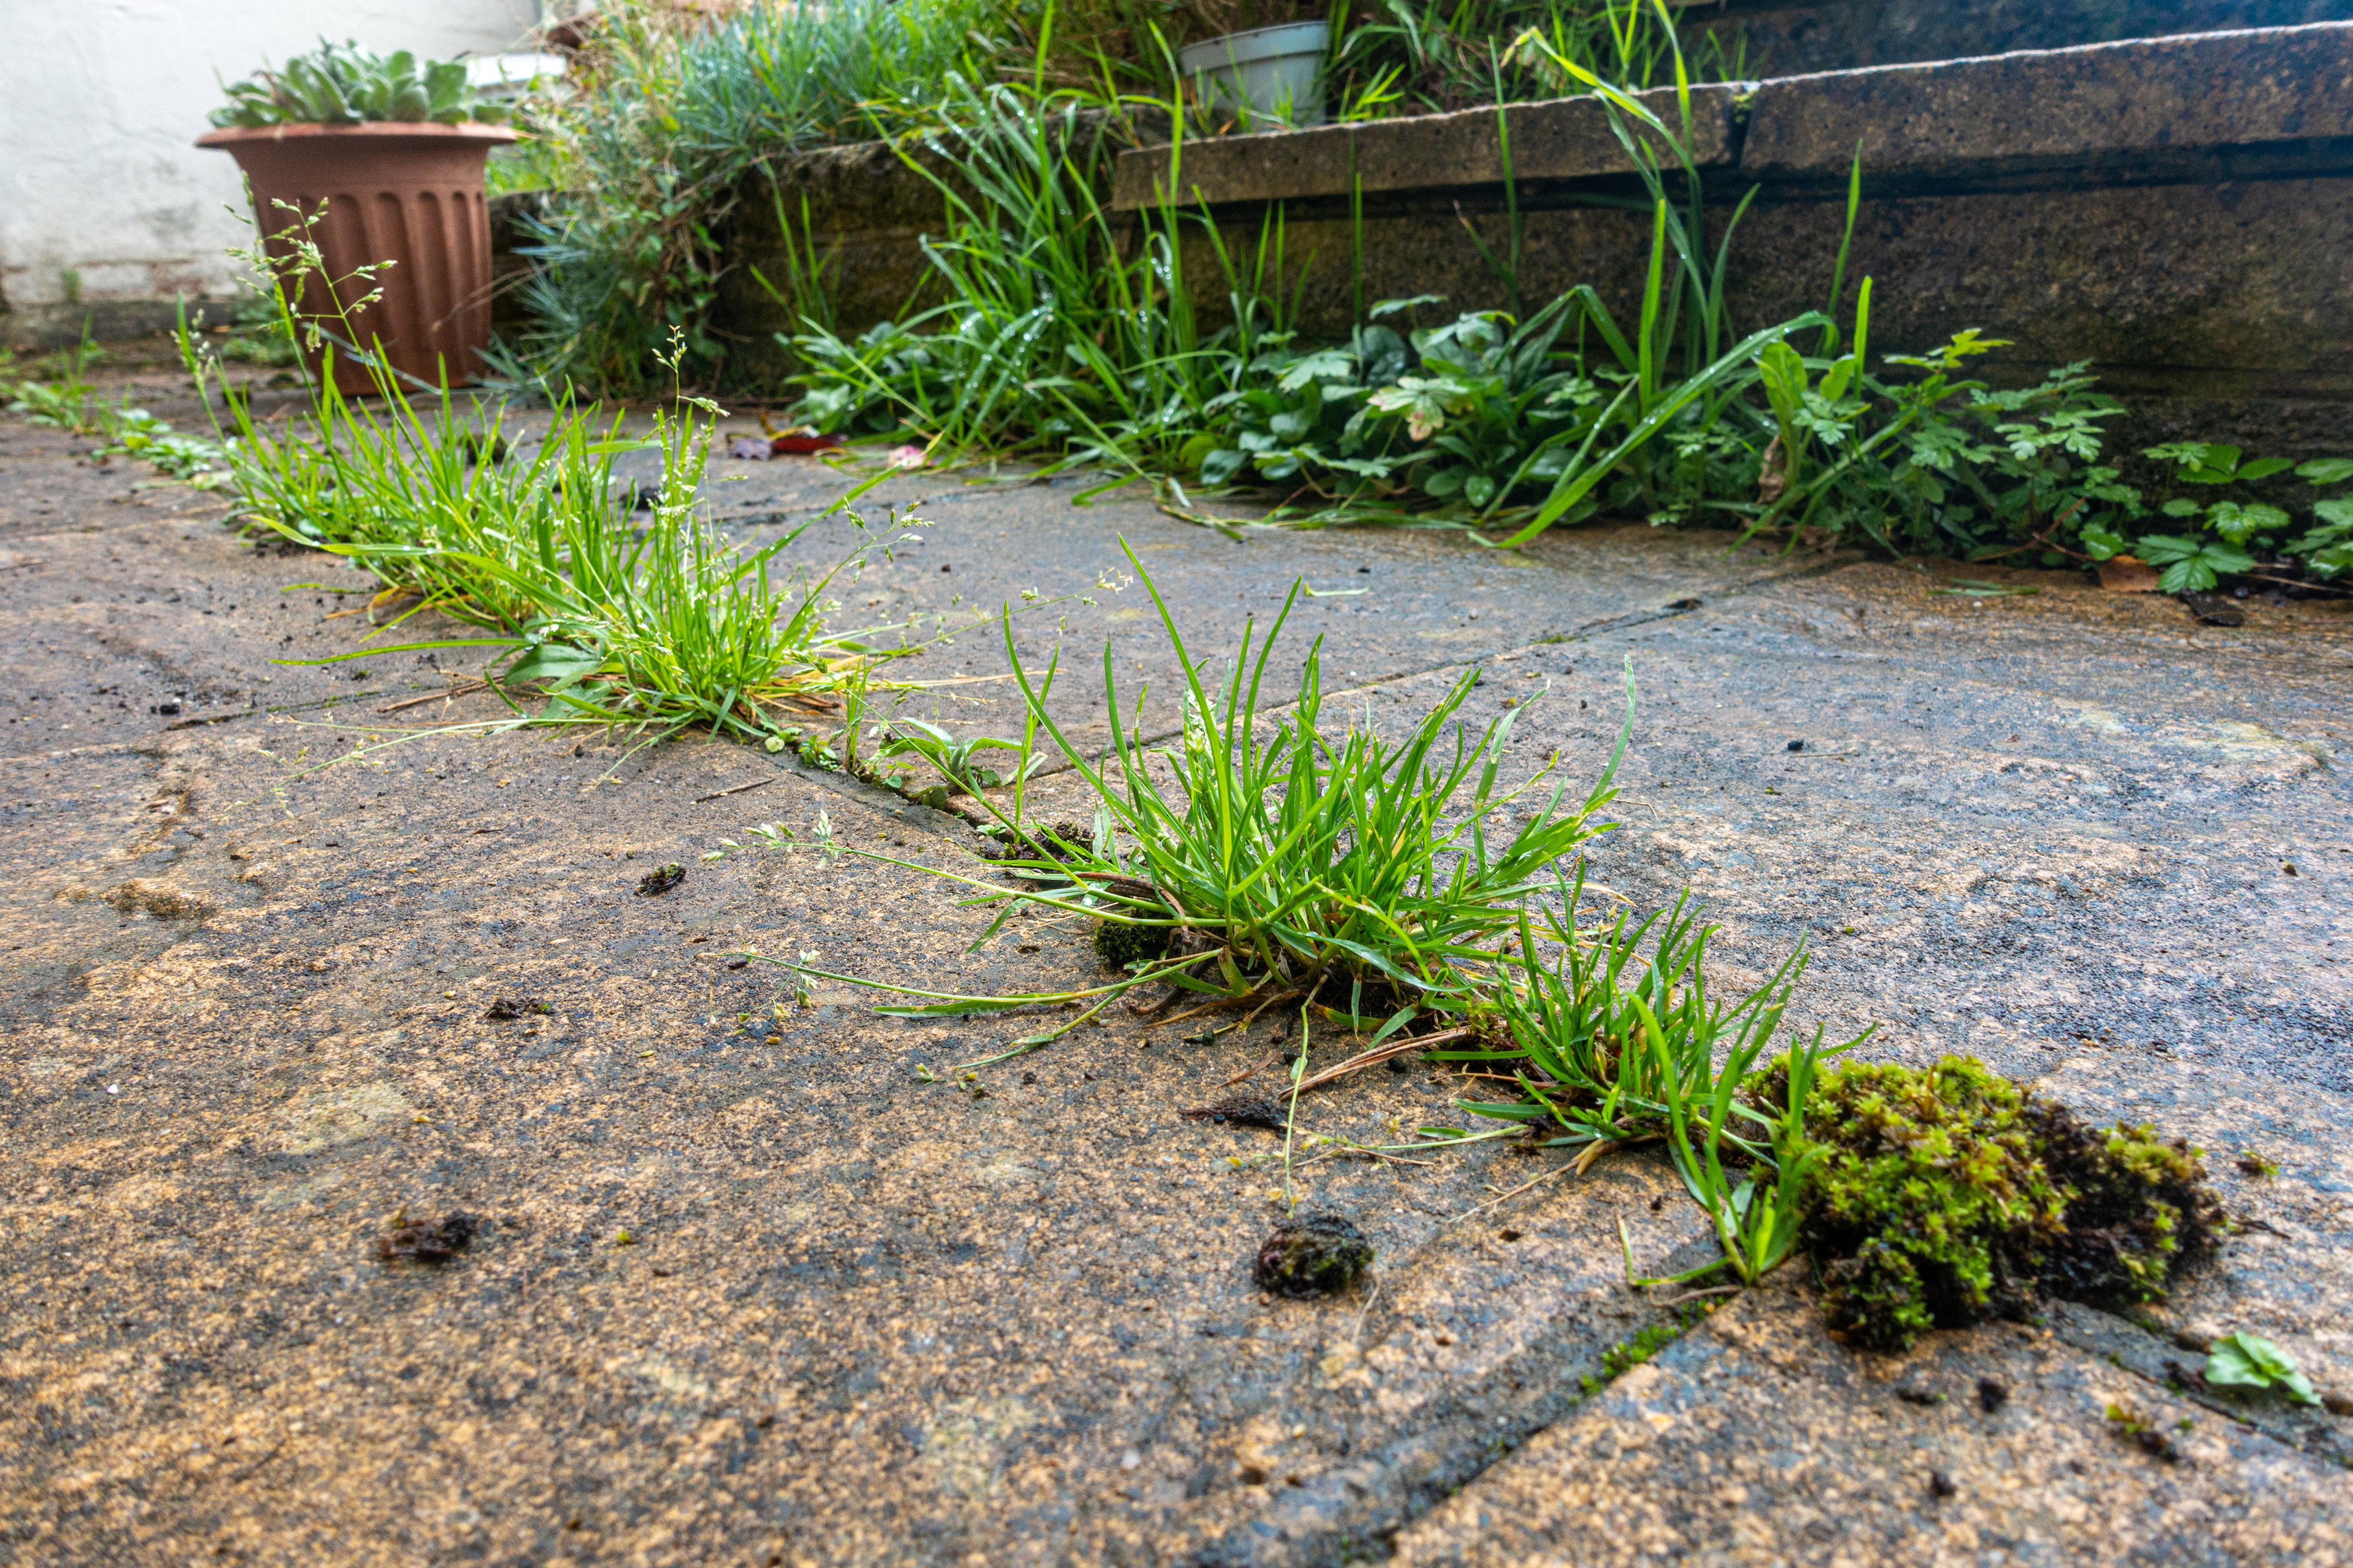 Close up view of weeds growing between paving slabs in a patio i